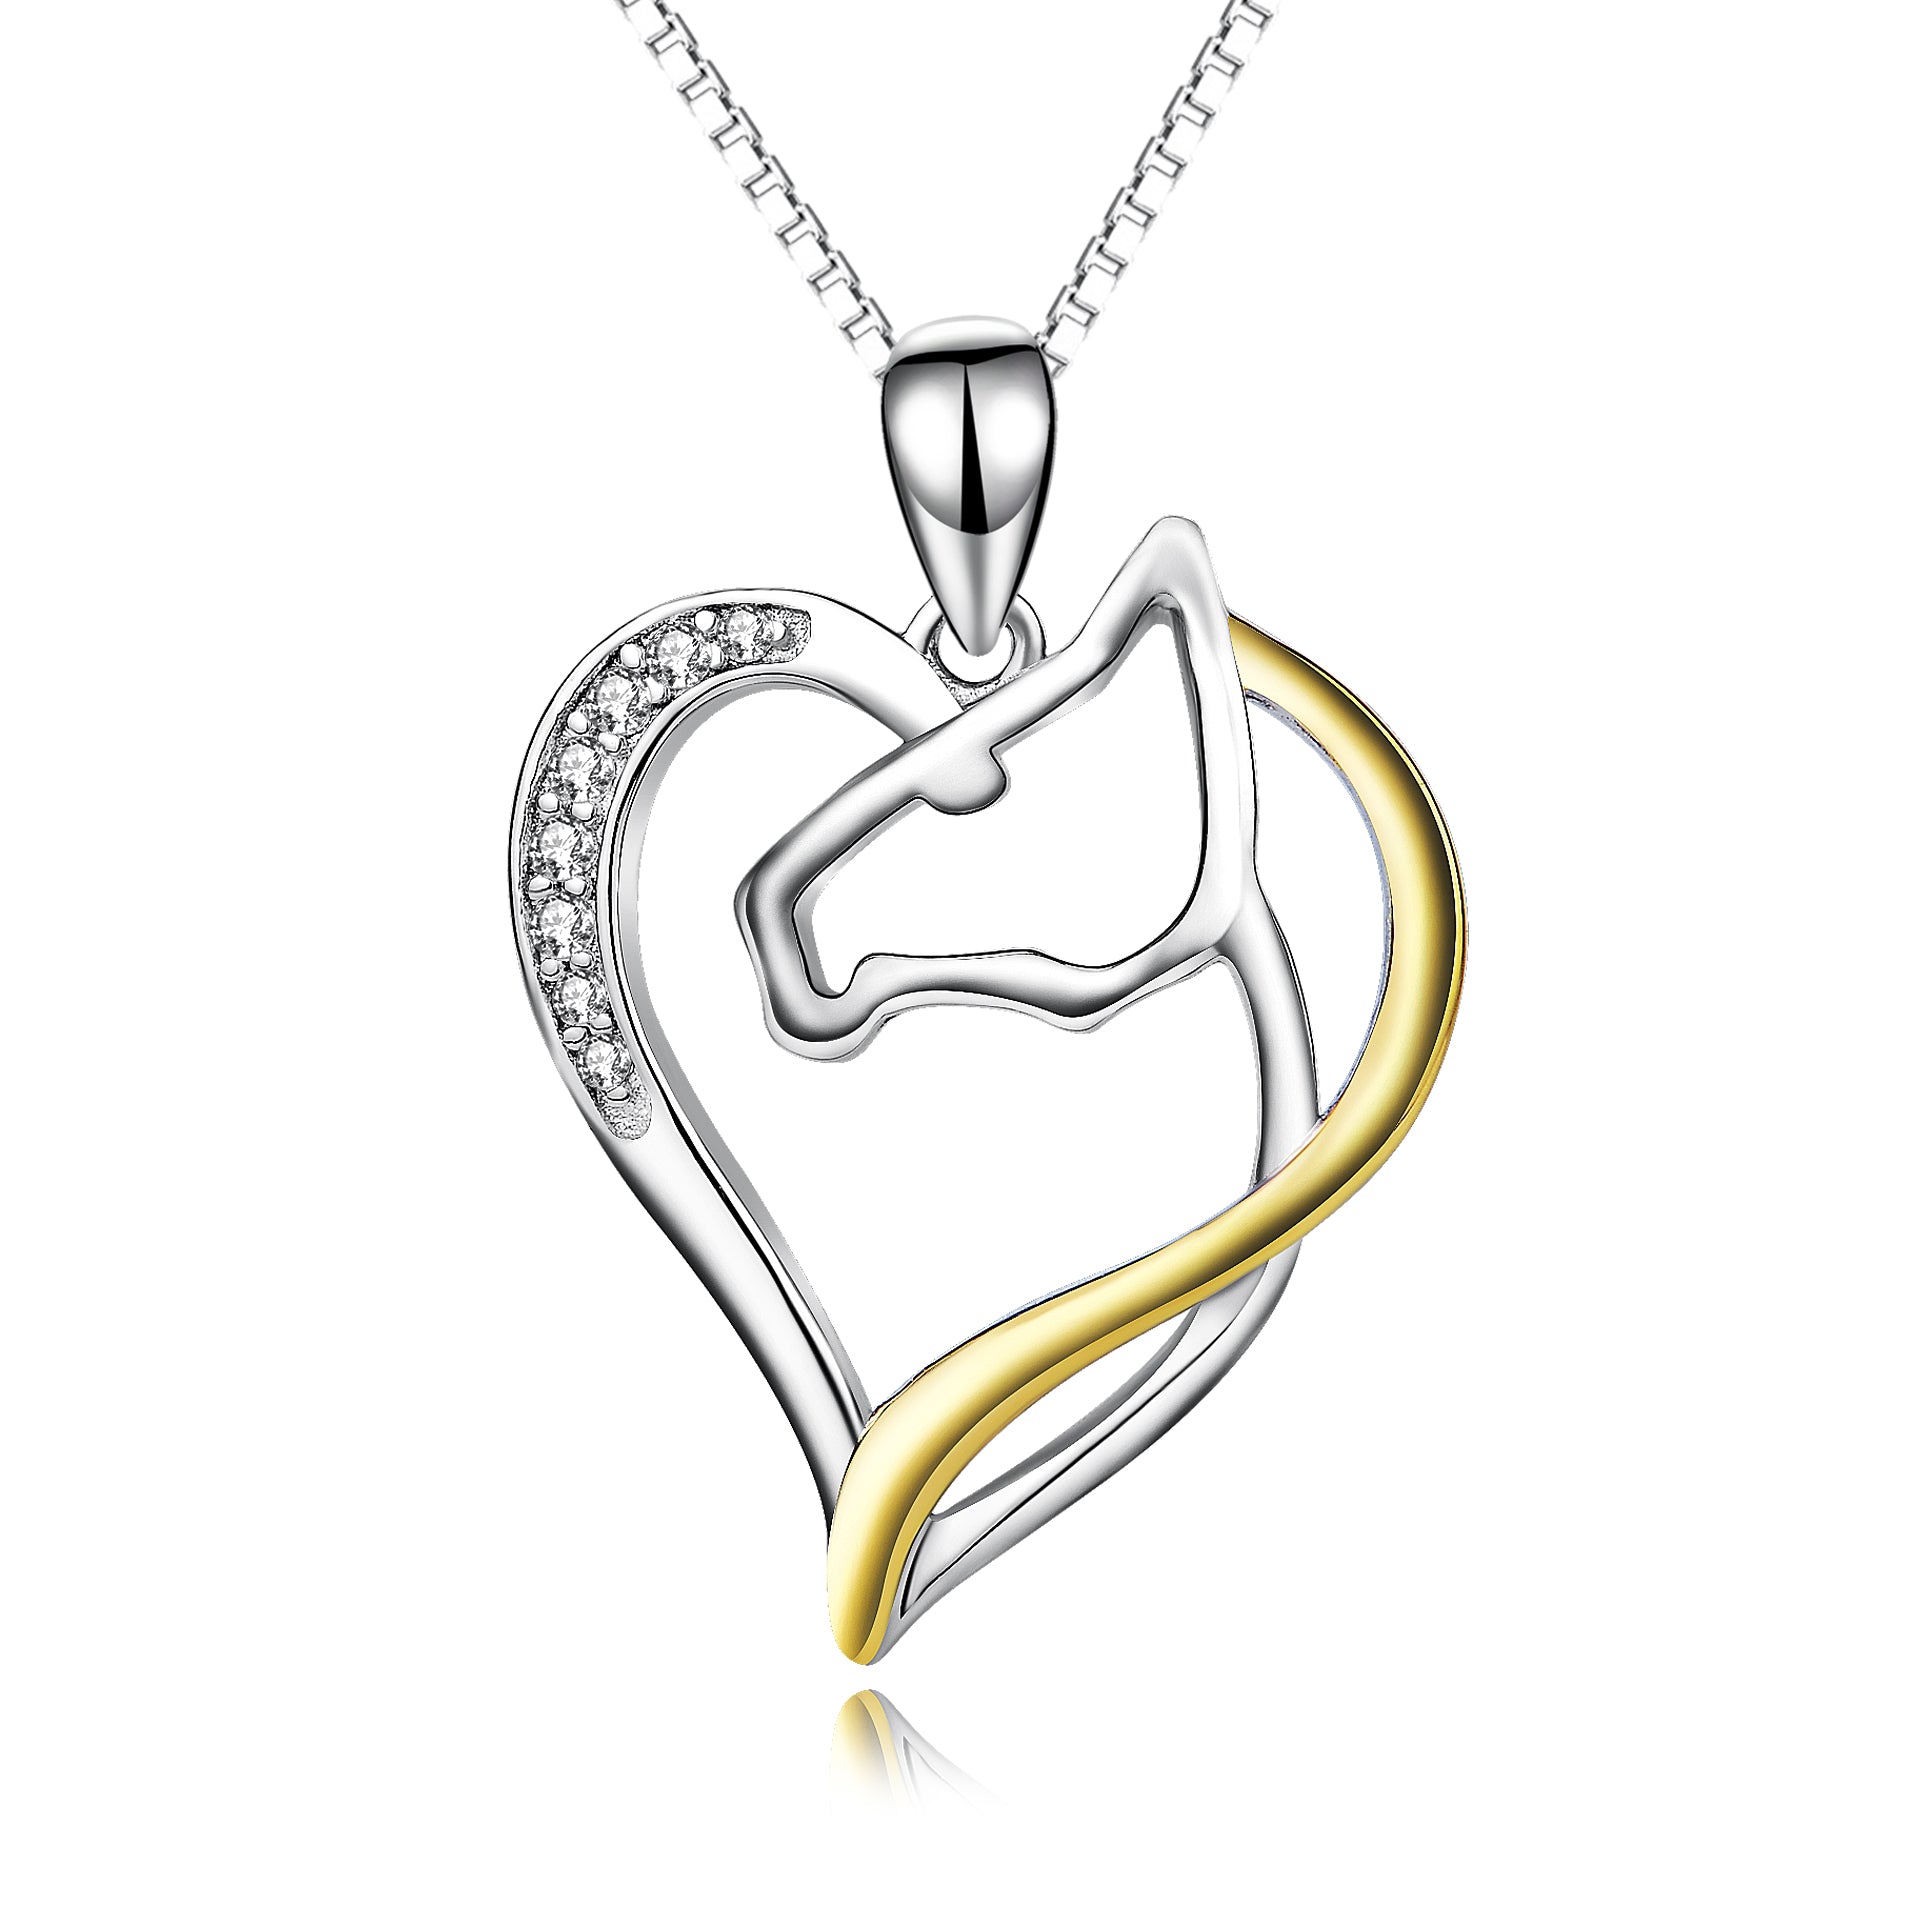 Horse head necklace heart-shaped infinite love sterling silver necklace